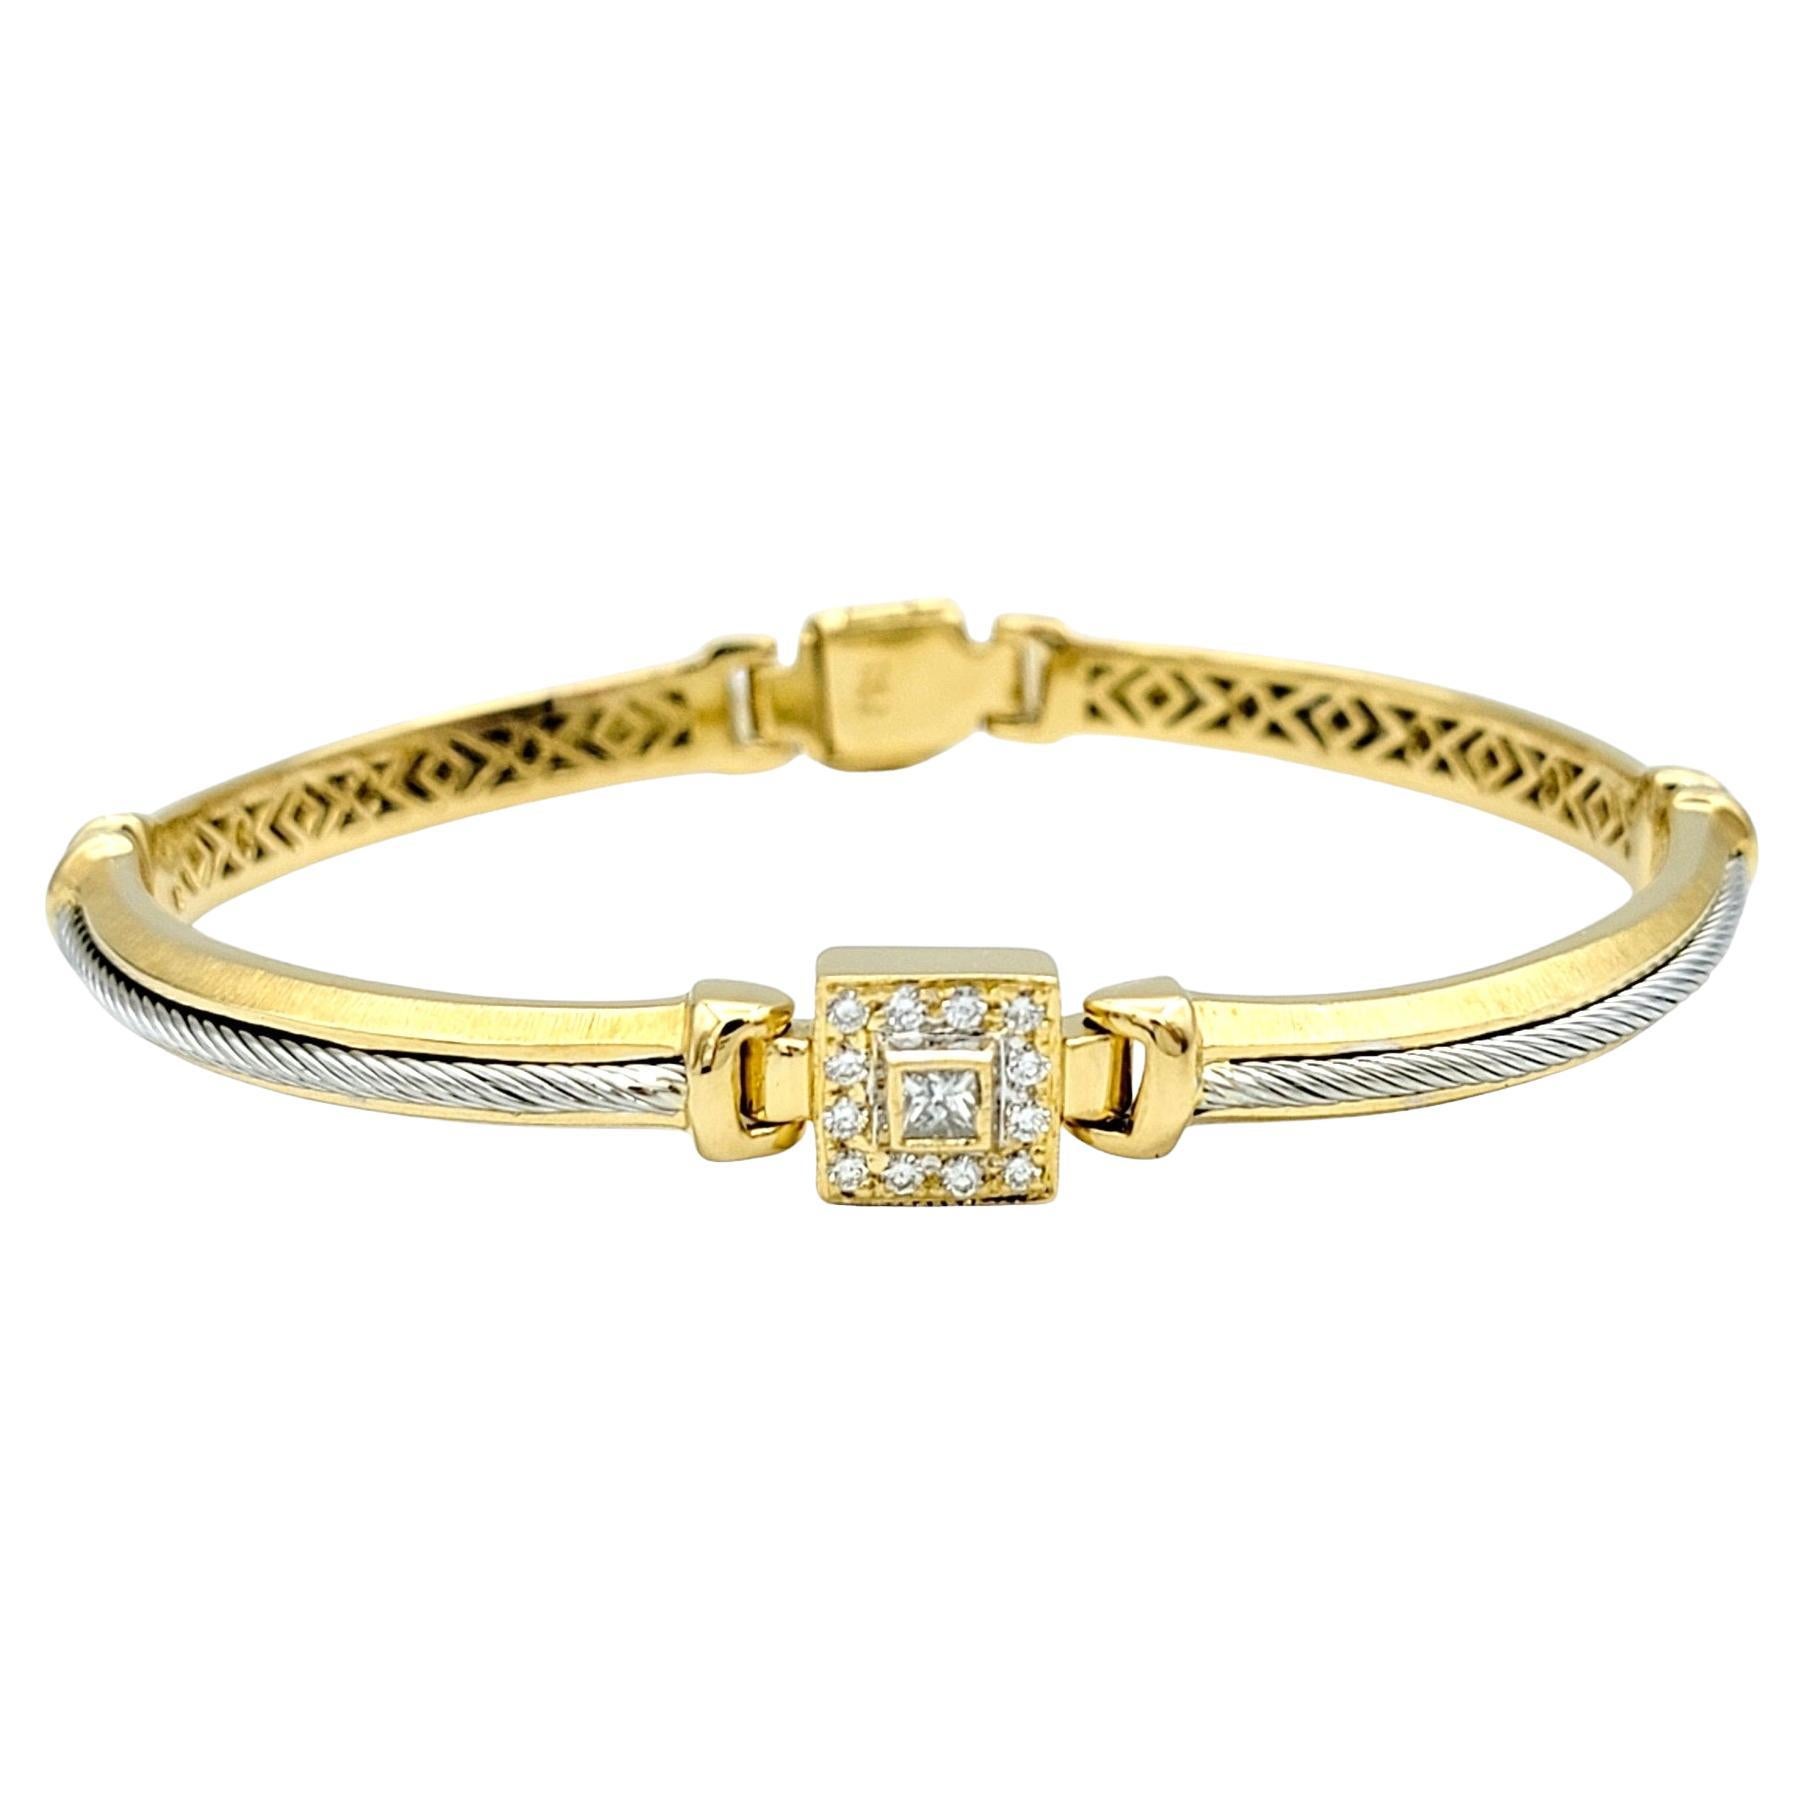 Philippe Charriol Two Tone Bangle Bracelet in 18 Karat Gold and Stainless Steel